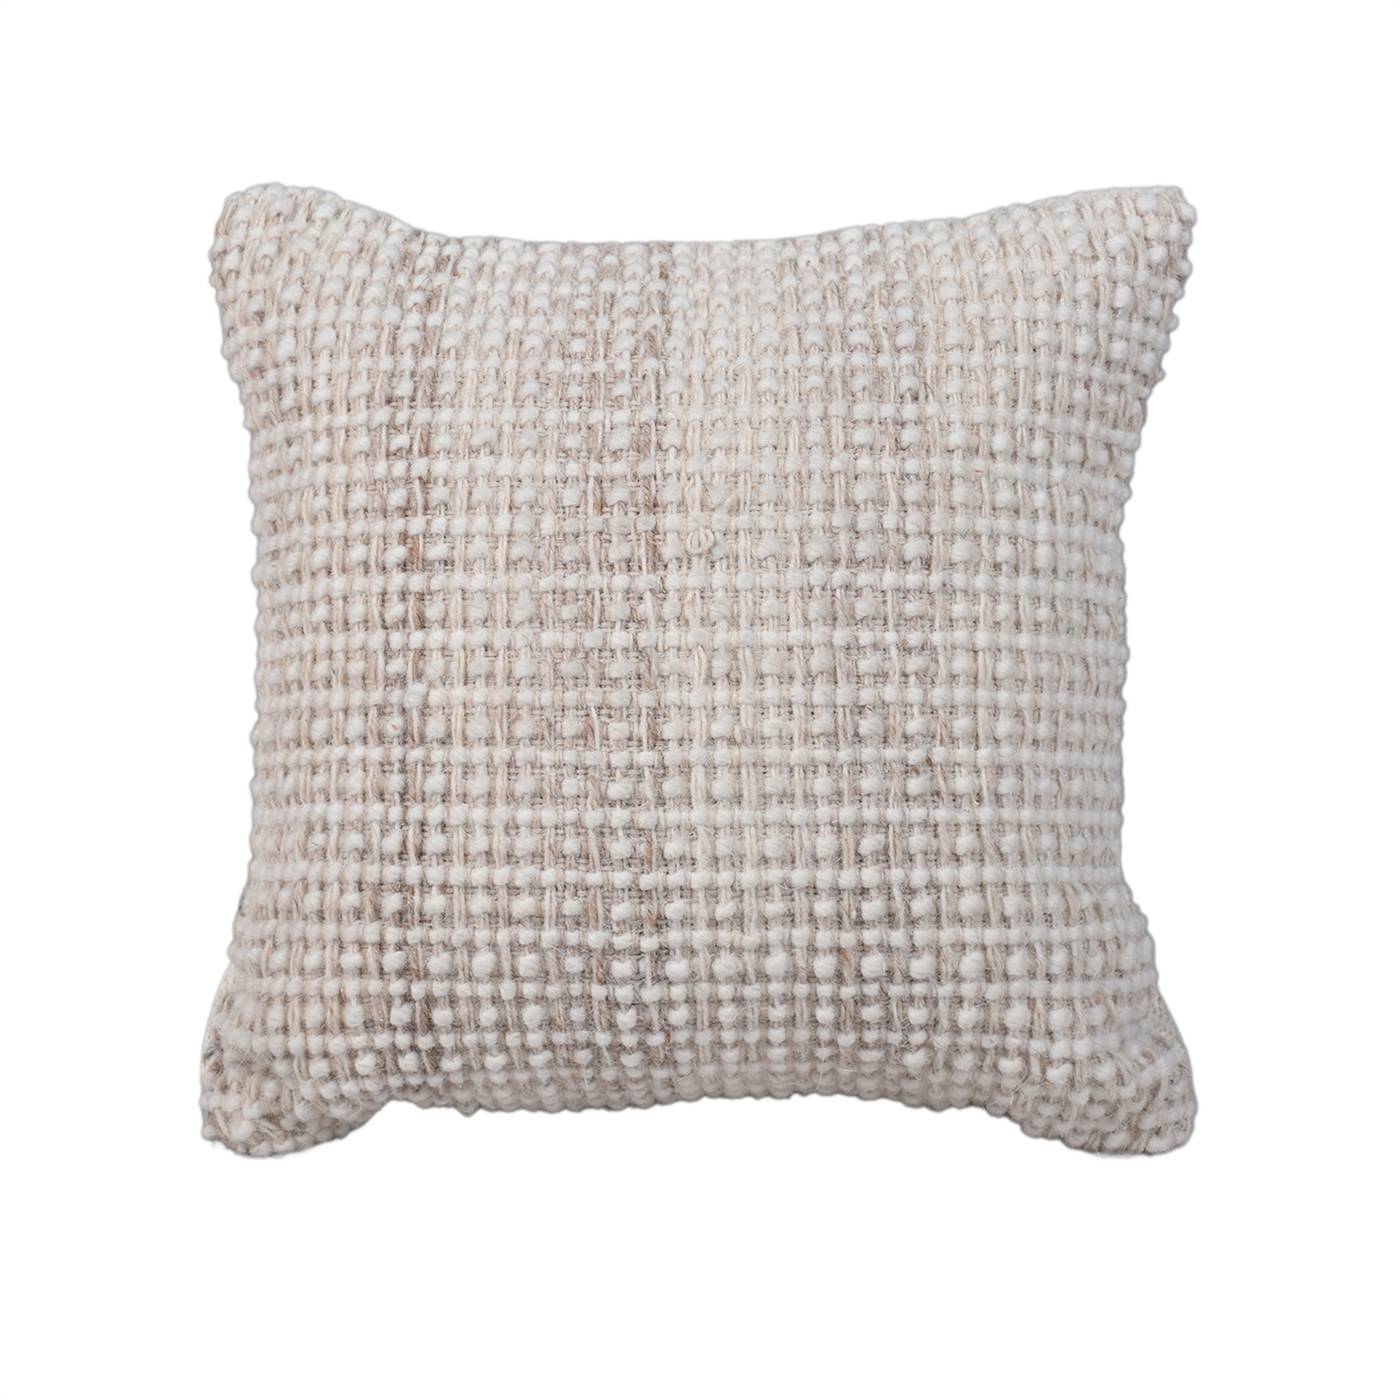 Highland Cushion, 45x45 cm, Natural White, Wool, Hand Woven, Handwoven, All Loop